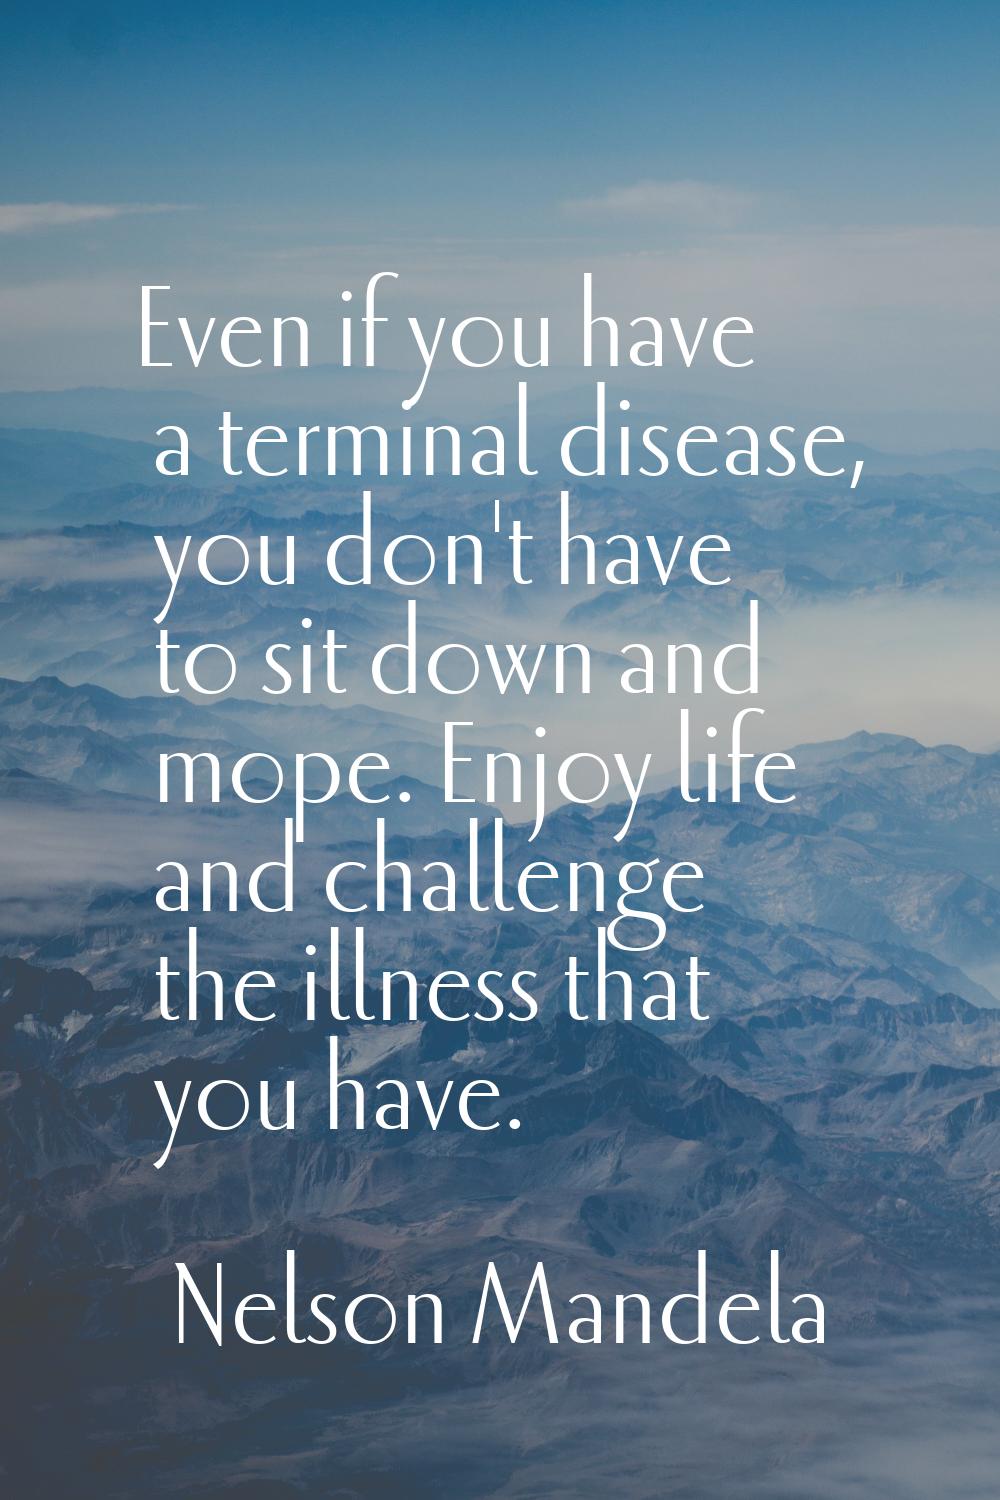 Even if you have a terminal disease, you don't have to sit down and mope. Enjoy life and challenge 